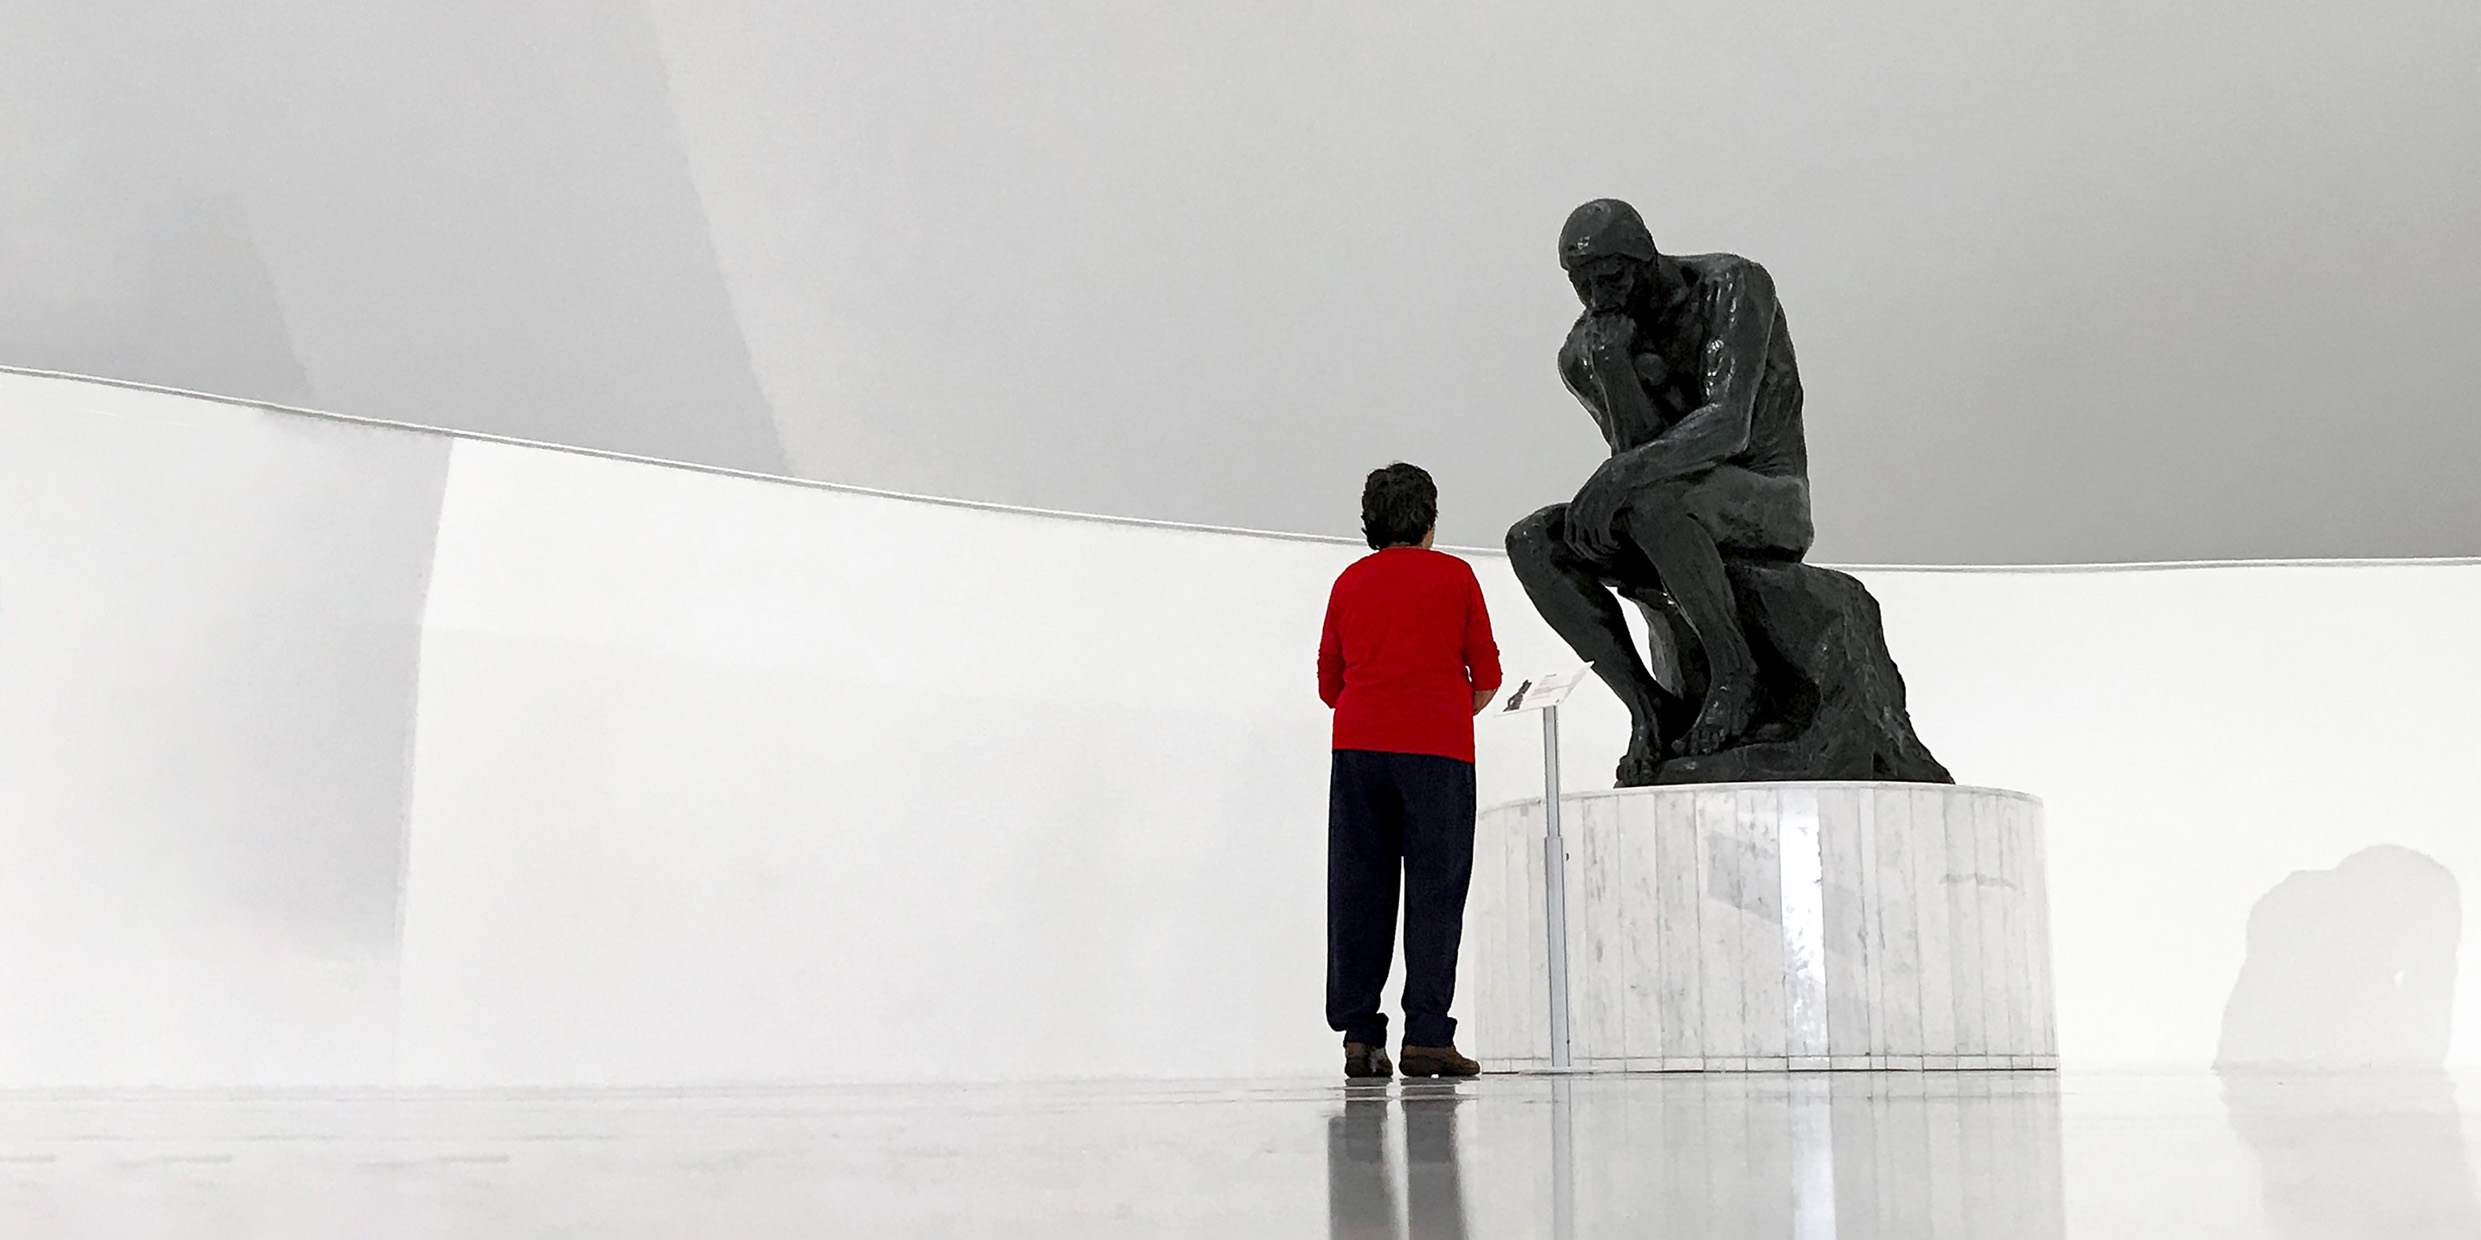 Image of person standing next to the famous sculpture of "The Thinker" inside a museum